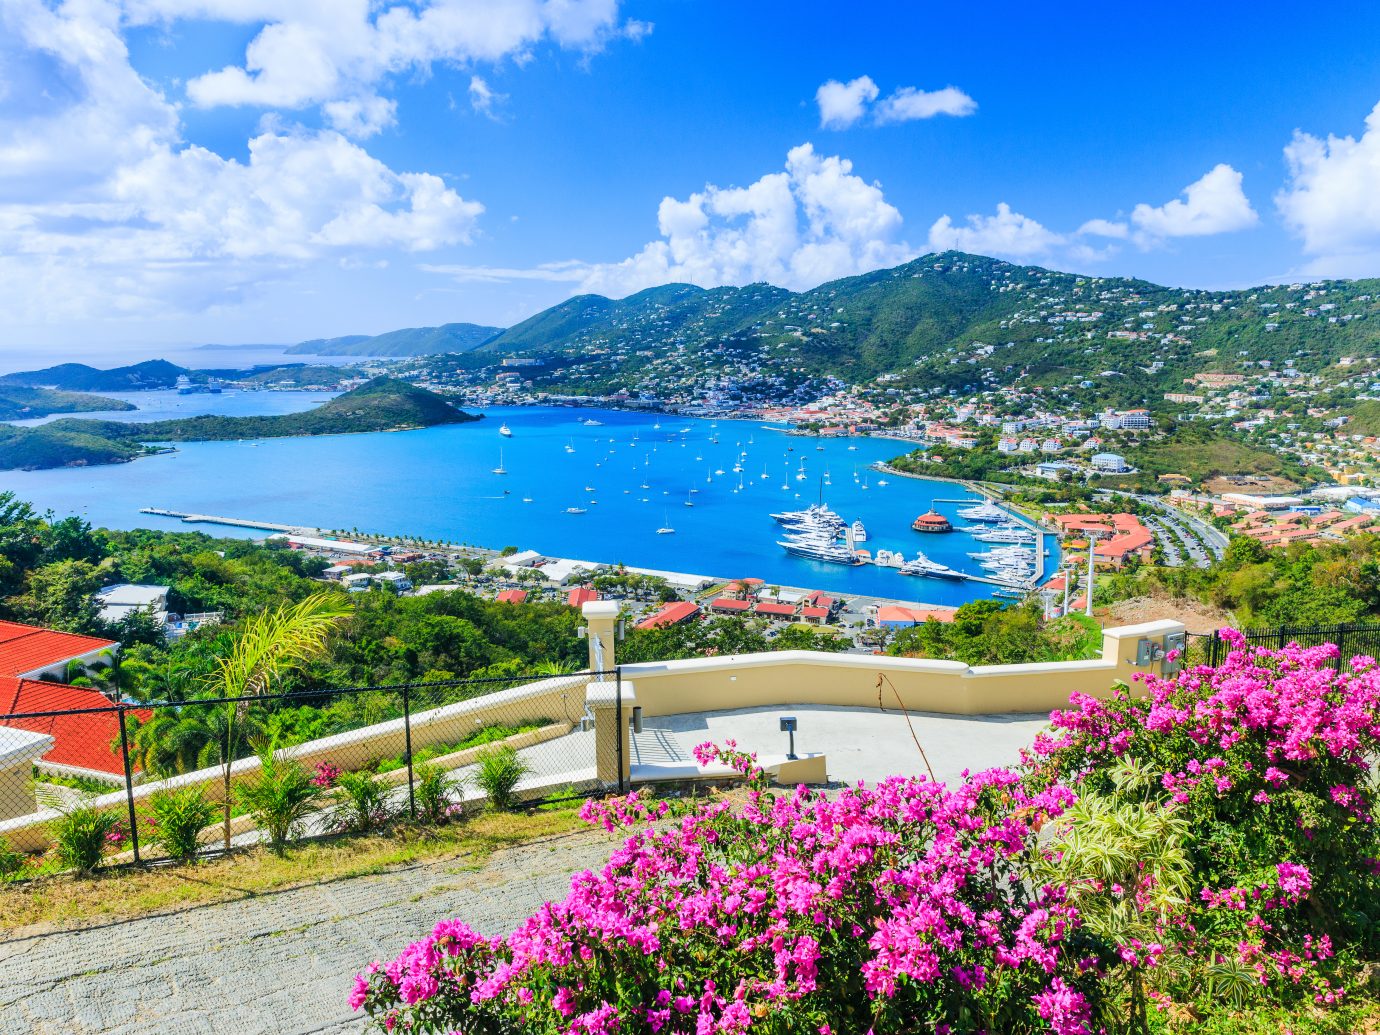 Panoramic view of St. Thomas in US Virgin Islands